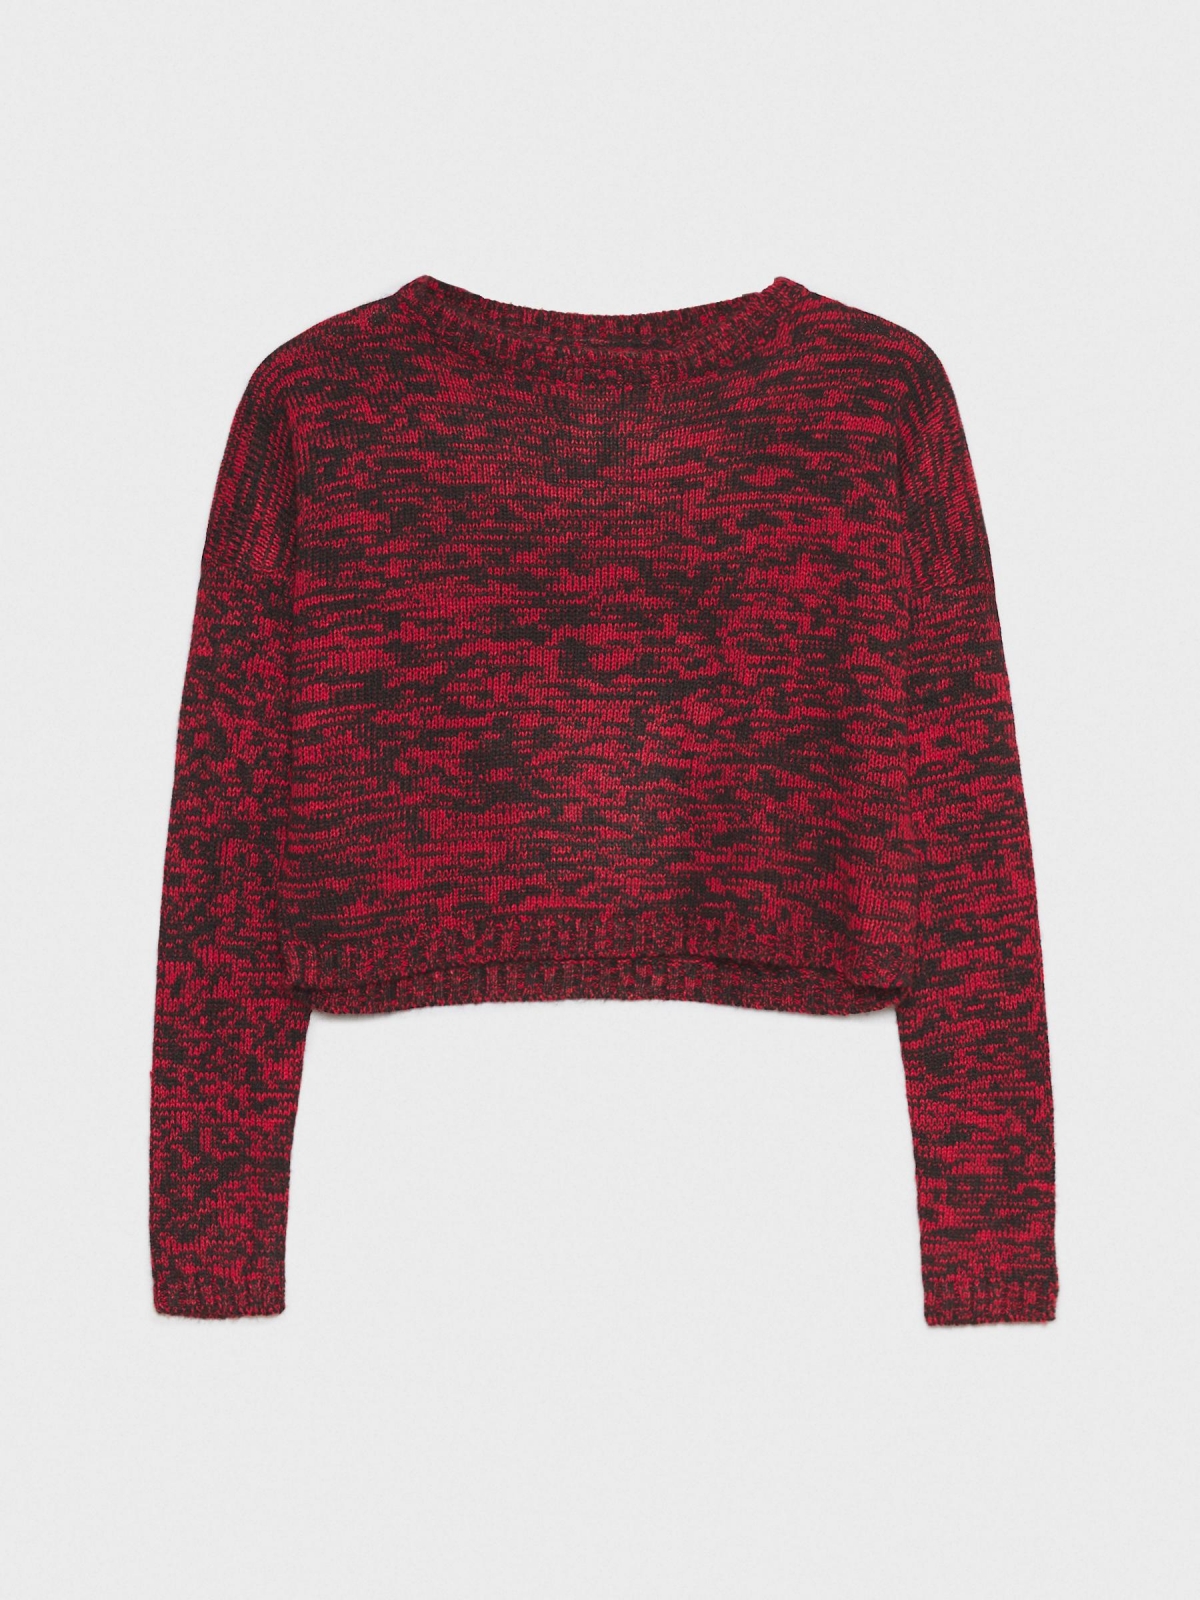  Heather cropped sweater red